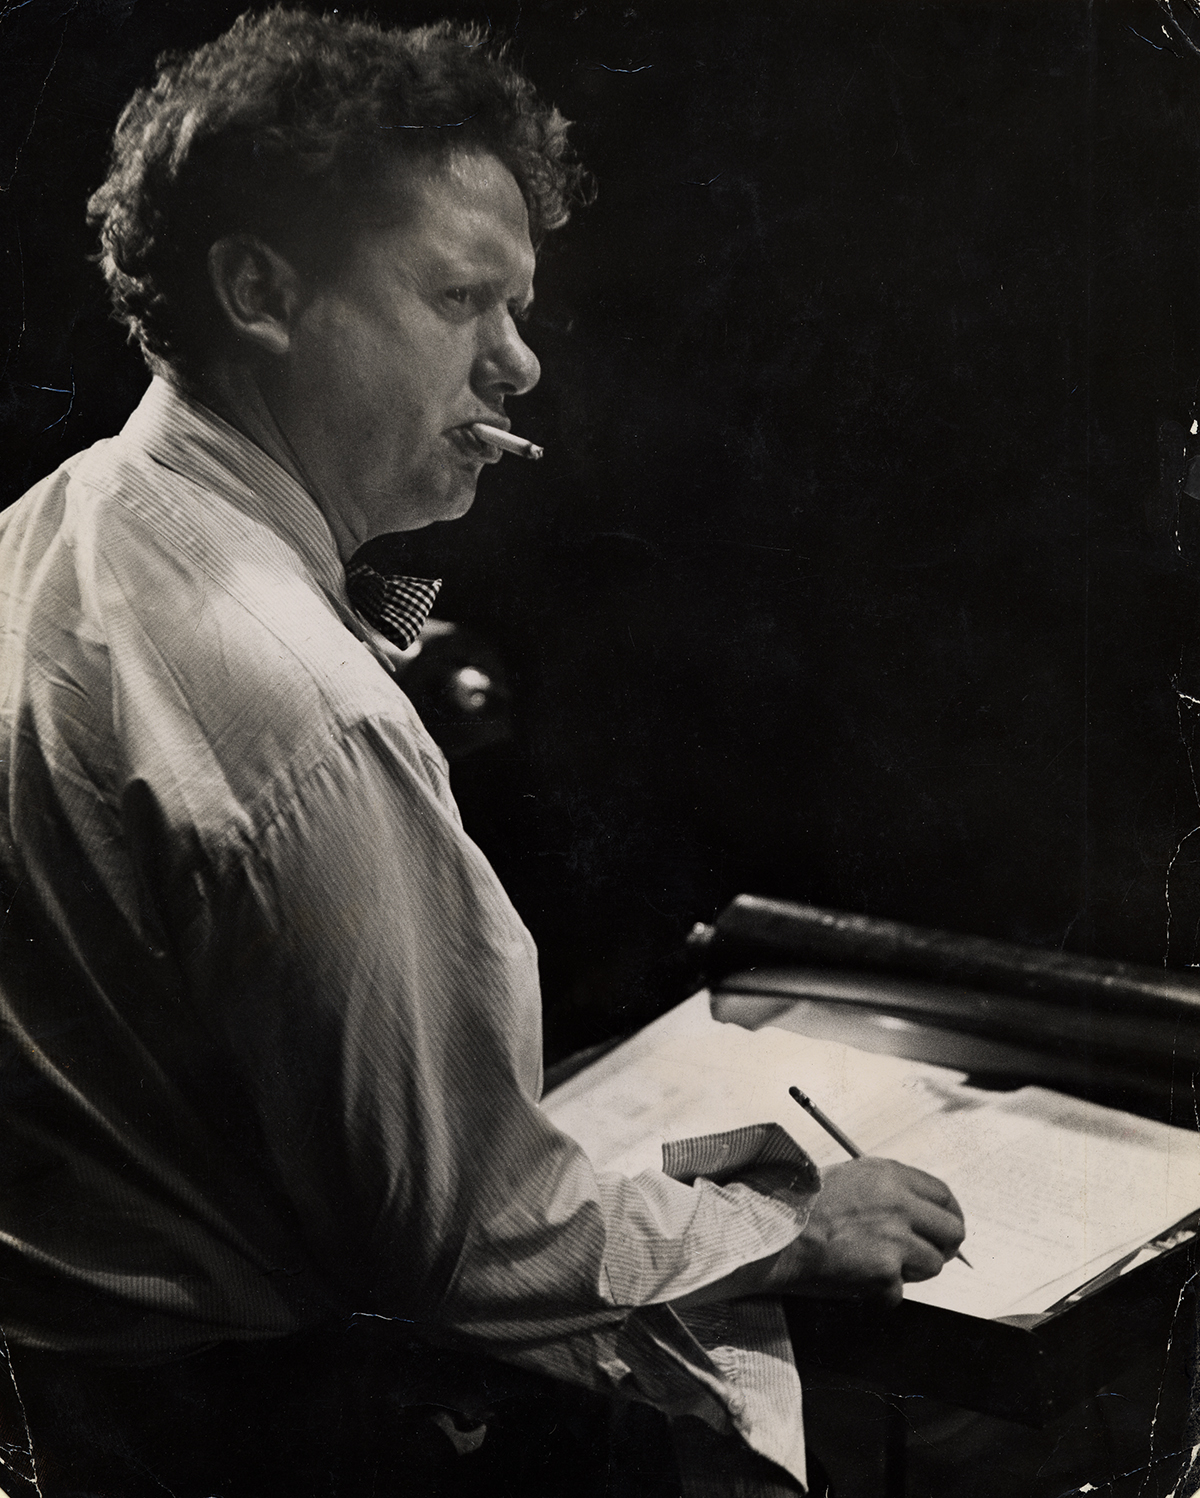 Dylan Thomas exhibition in New York features materials from the Ransom Center’s collections